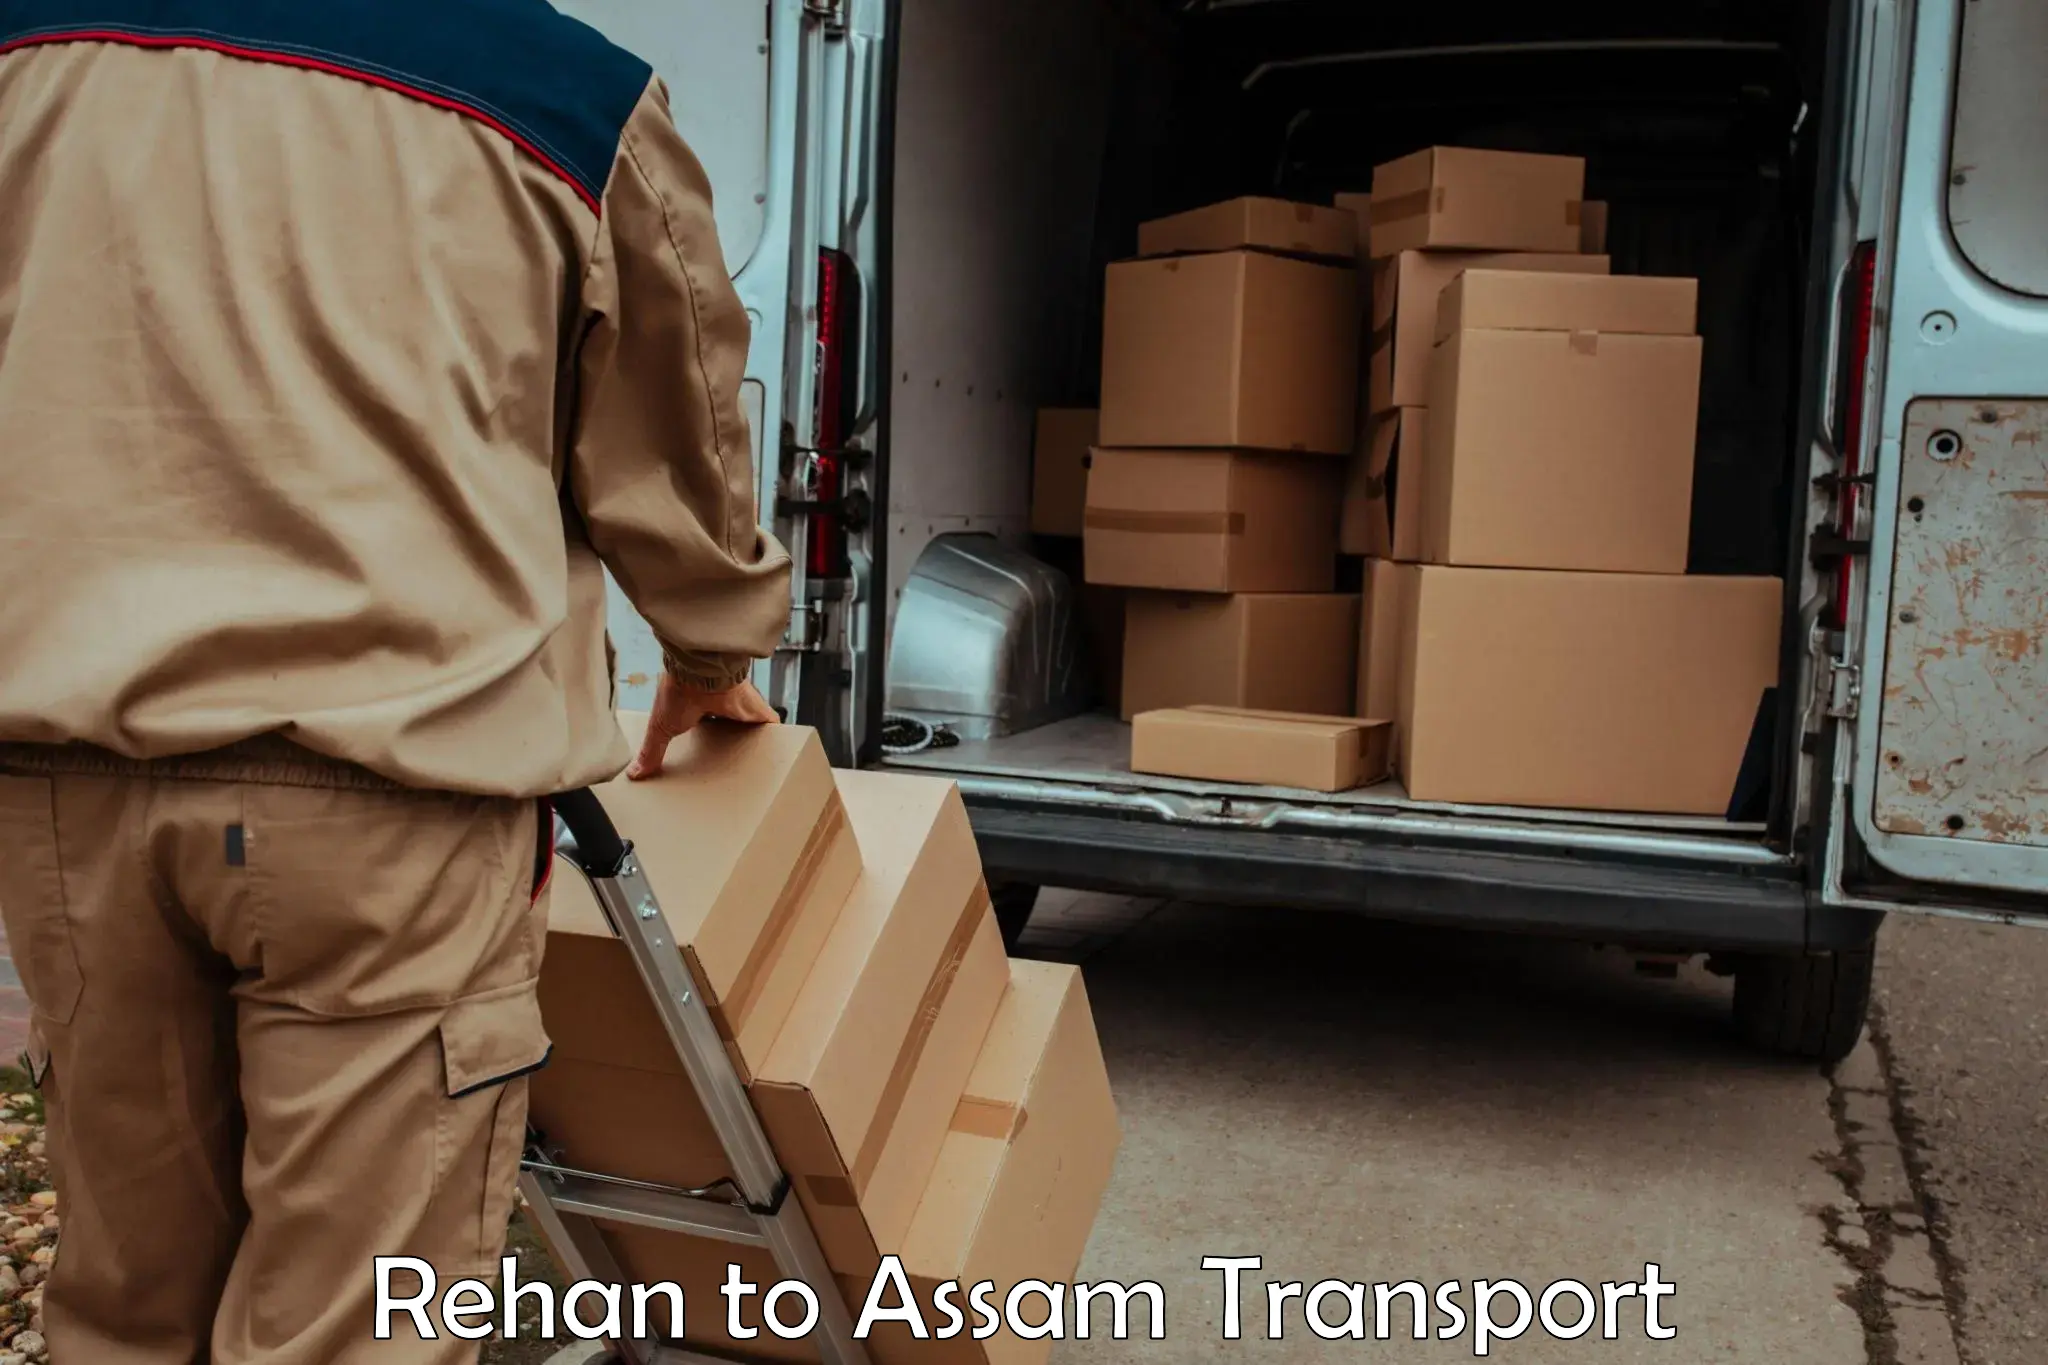 Nearby transport service Rehan to Assam